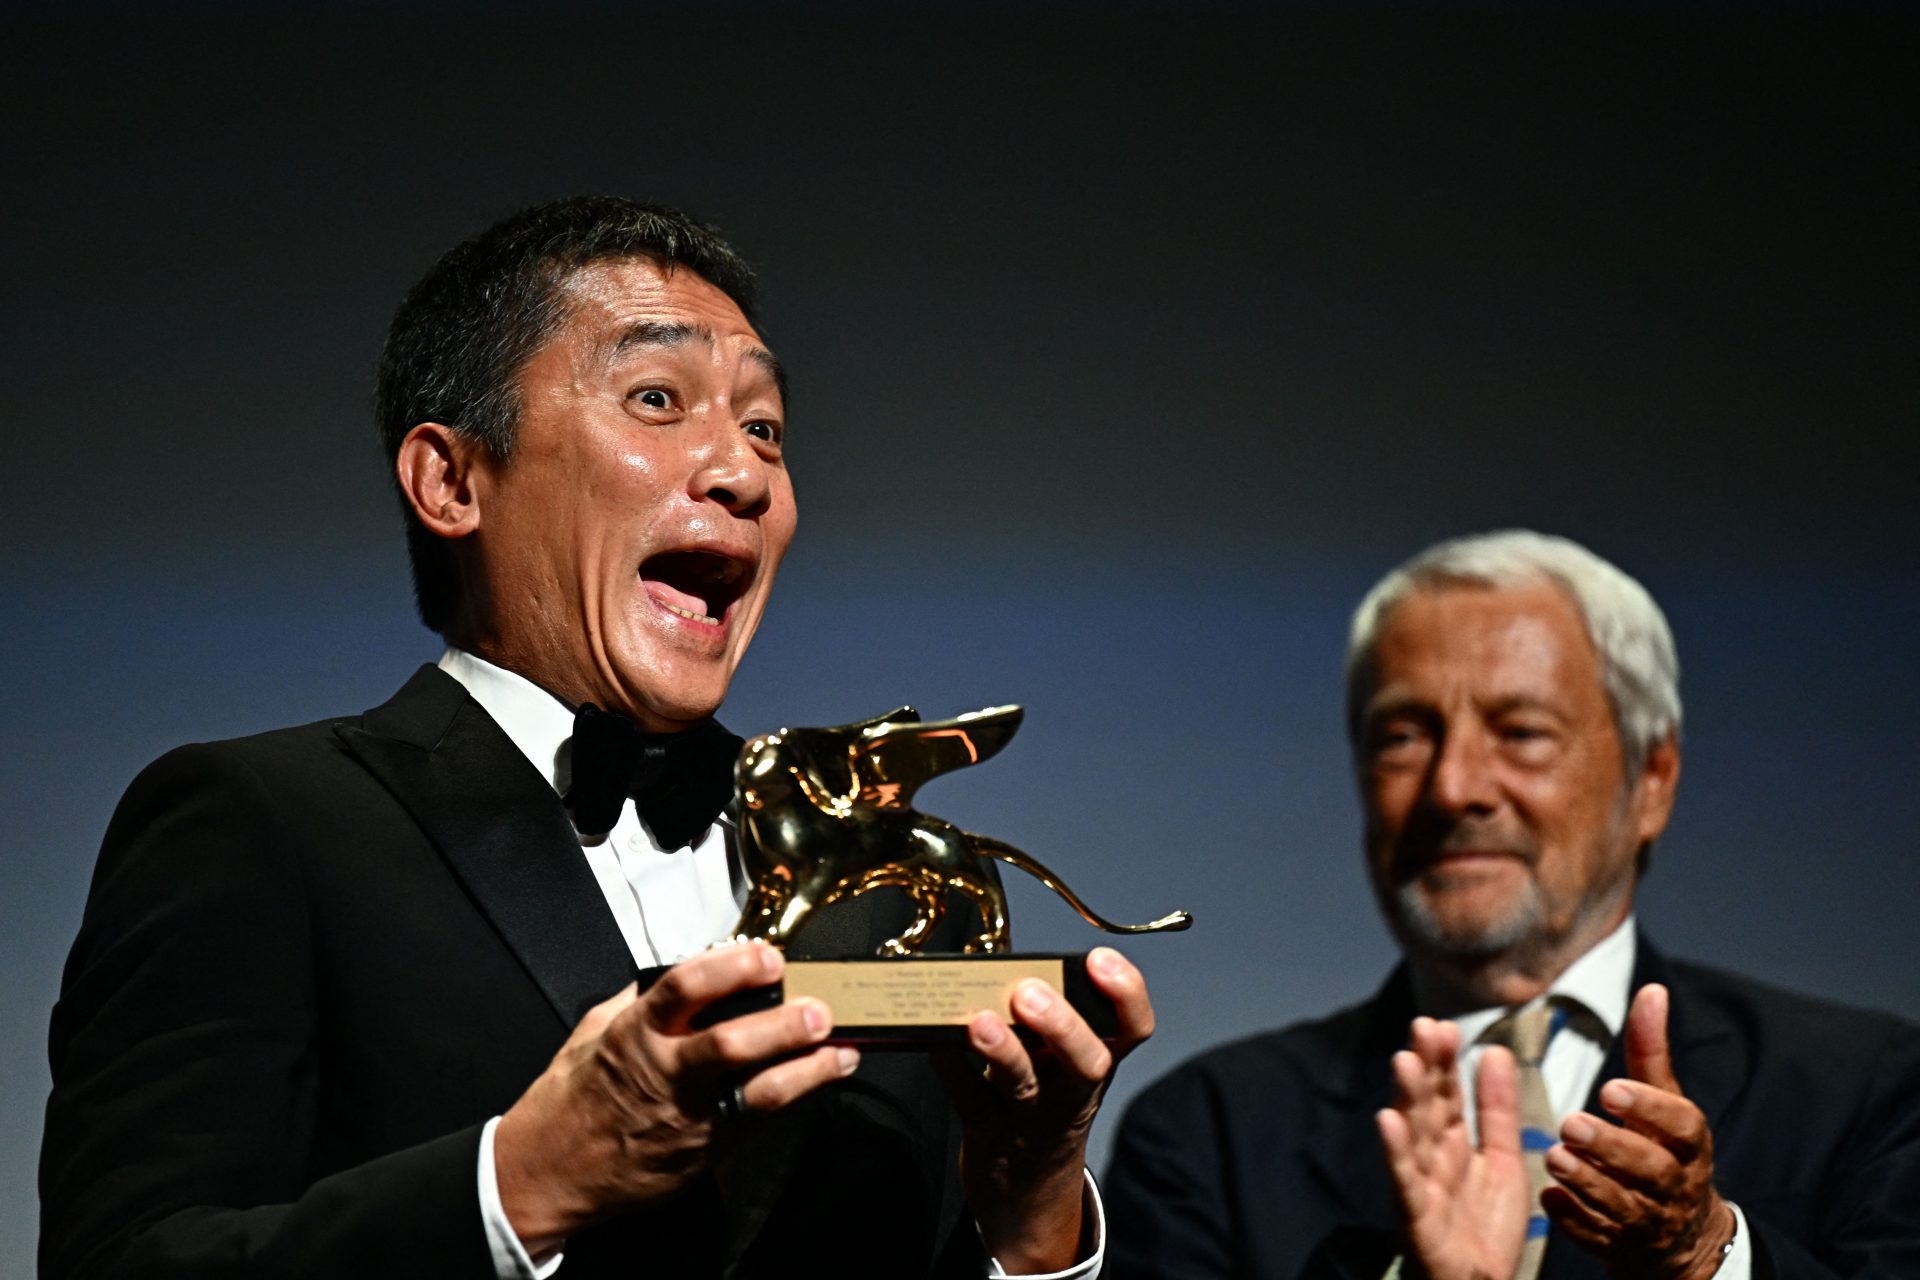 Tony Leung honored at 2023 Venice Film Festival